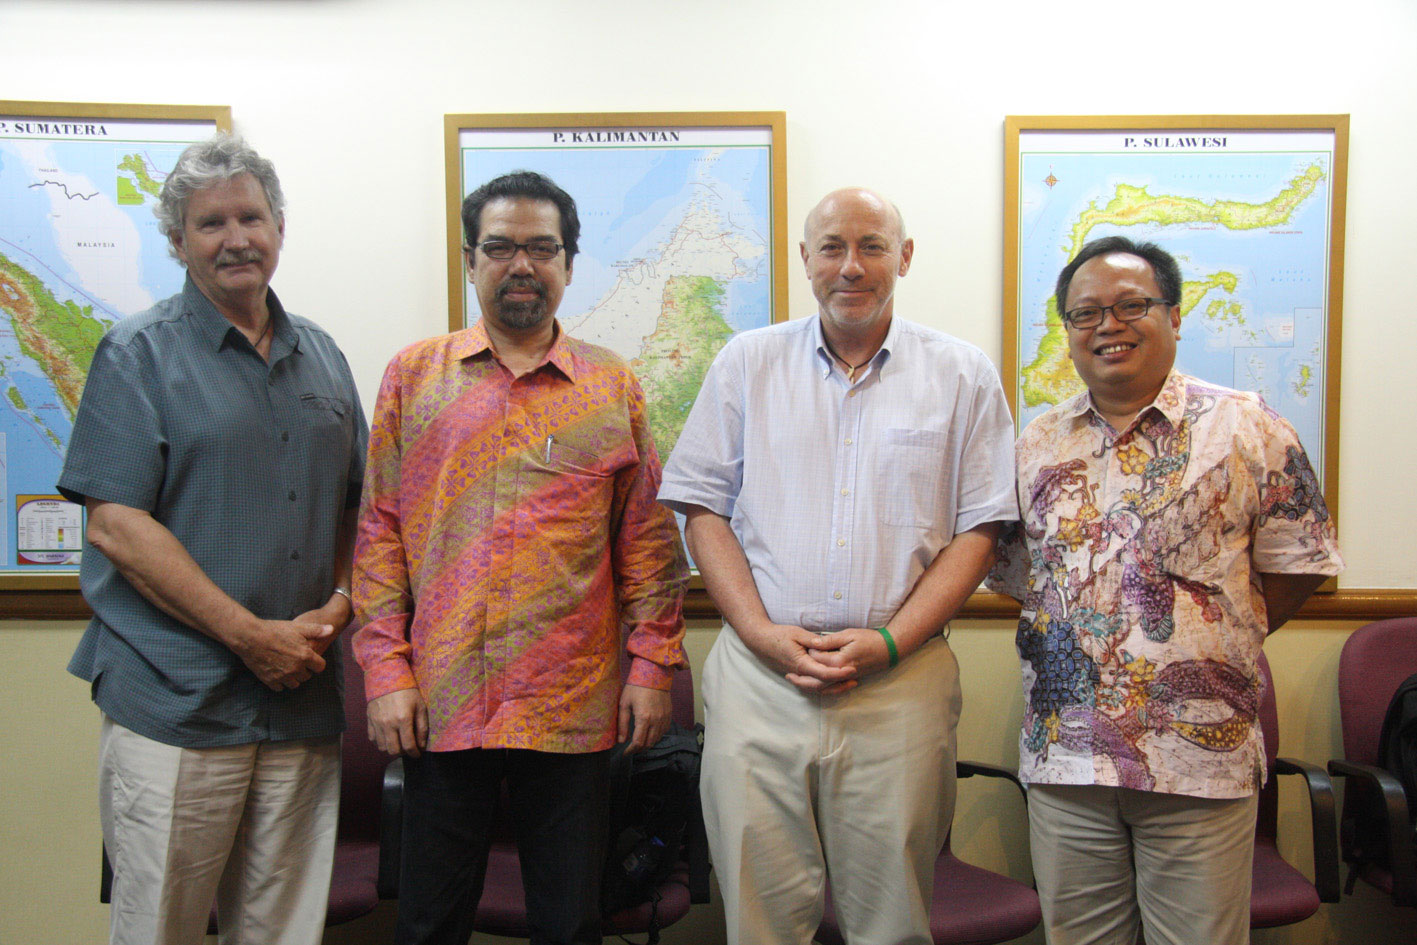 Members of The Independent Stakeholder Advisory Committee (SAC). From left to right: Joe Lawson, Al Azhar, James Griffiths, Budi Wardhana